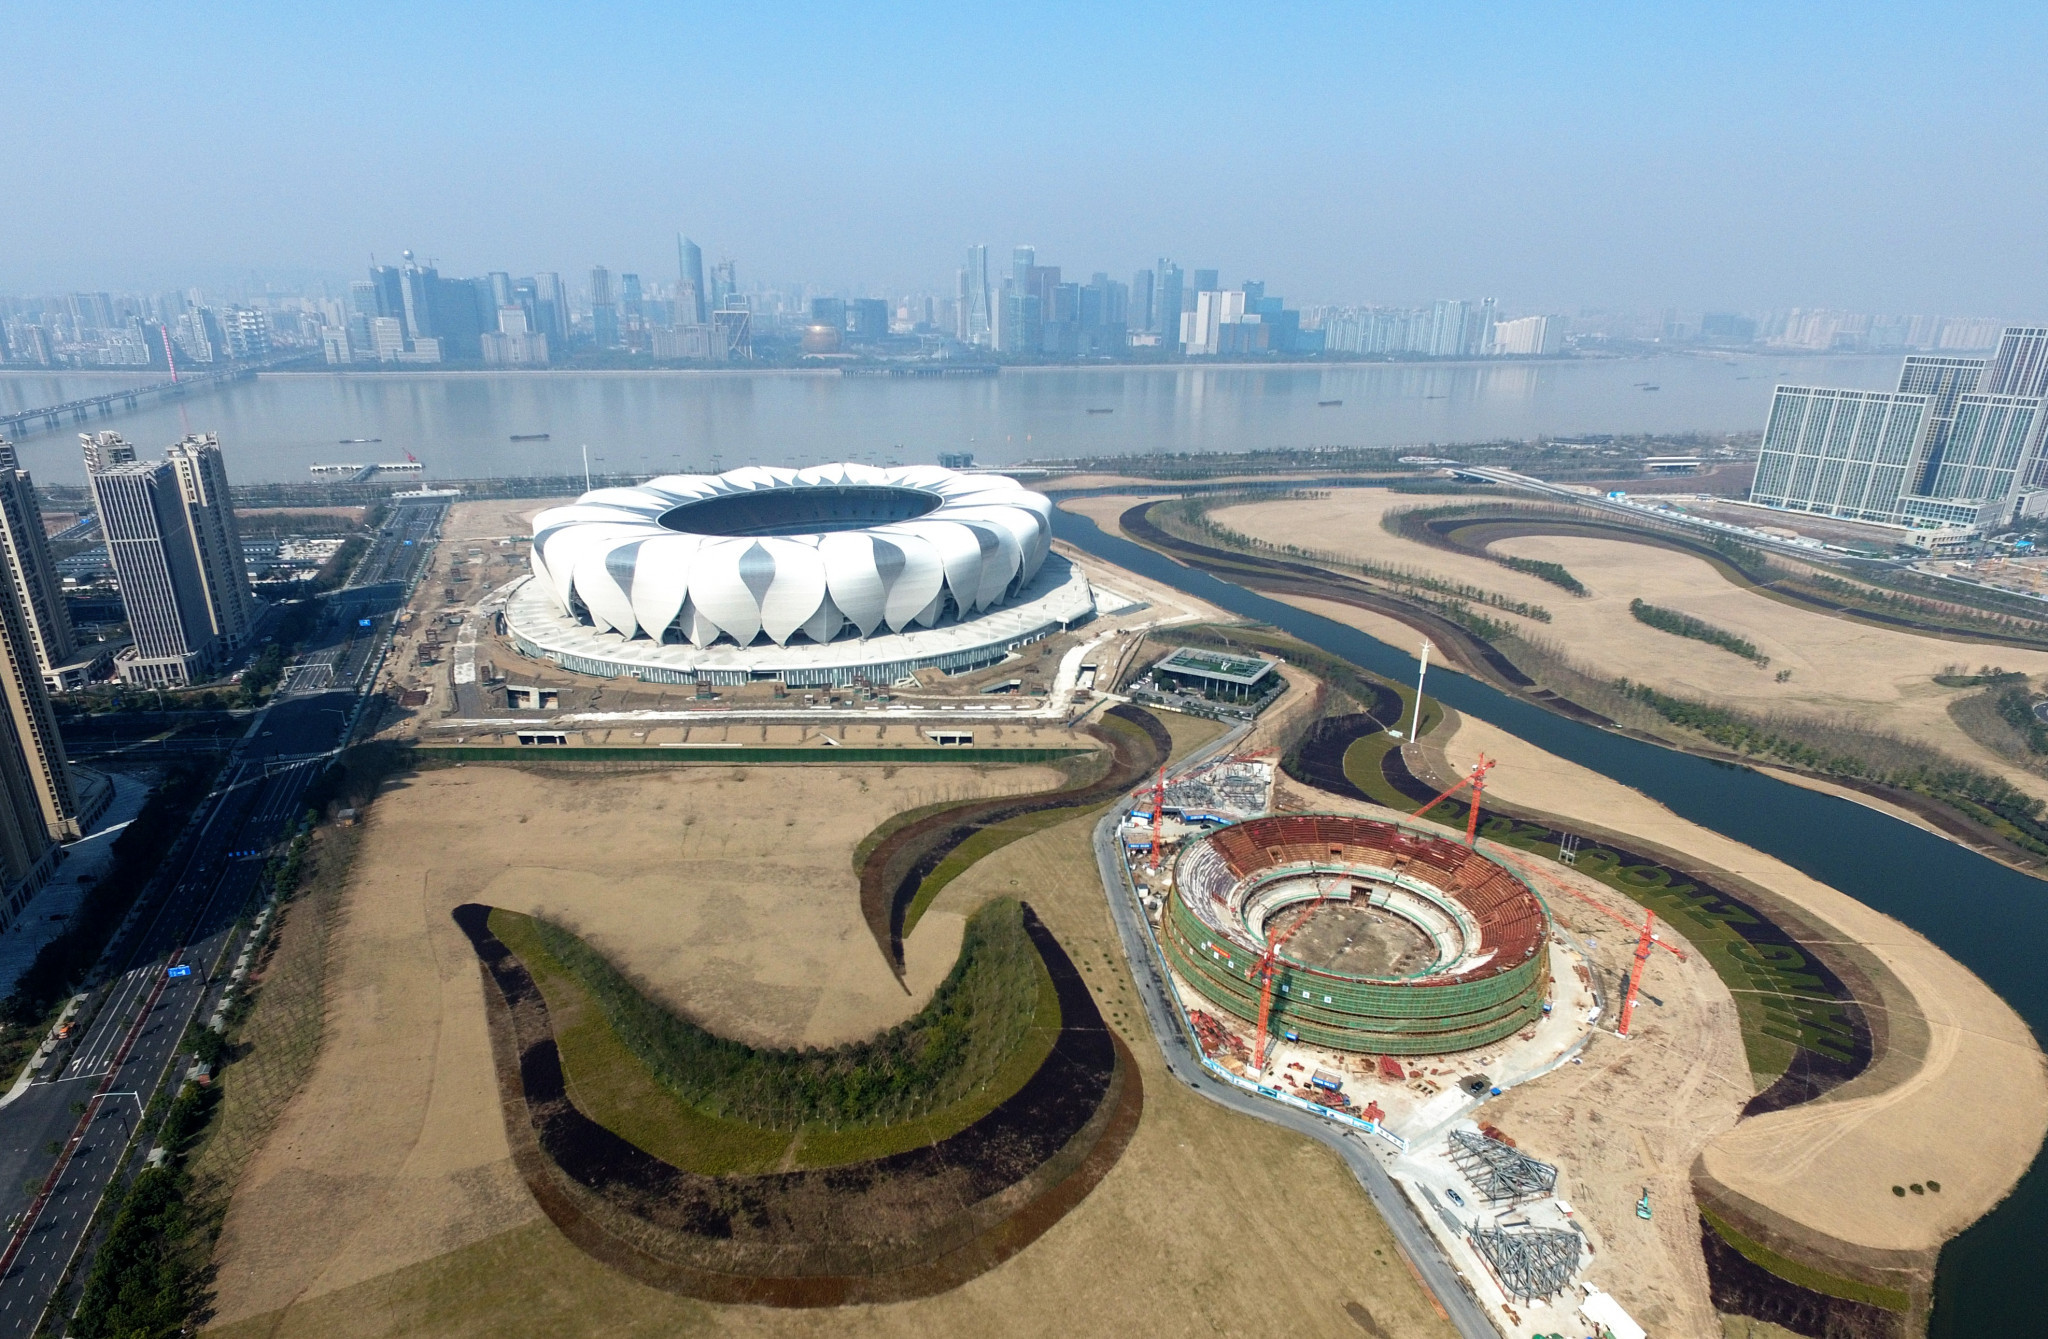 Hangzhou will host the next Asian Games in 2022 ©Getty Images